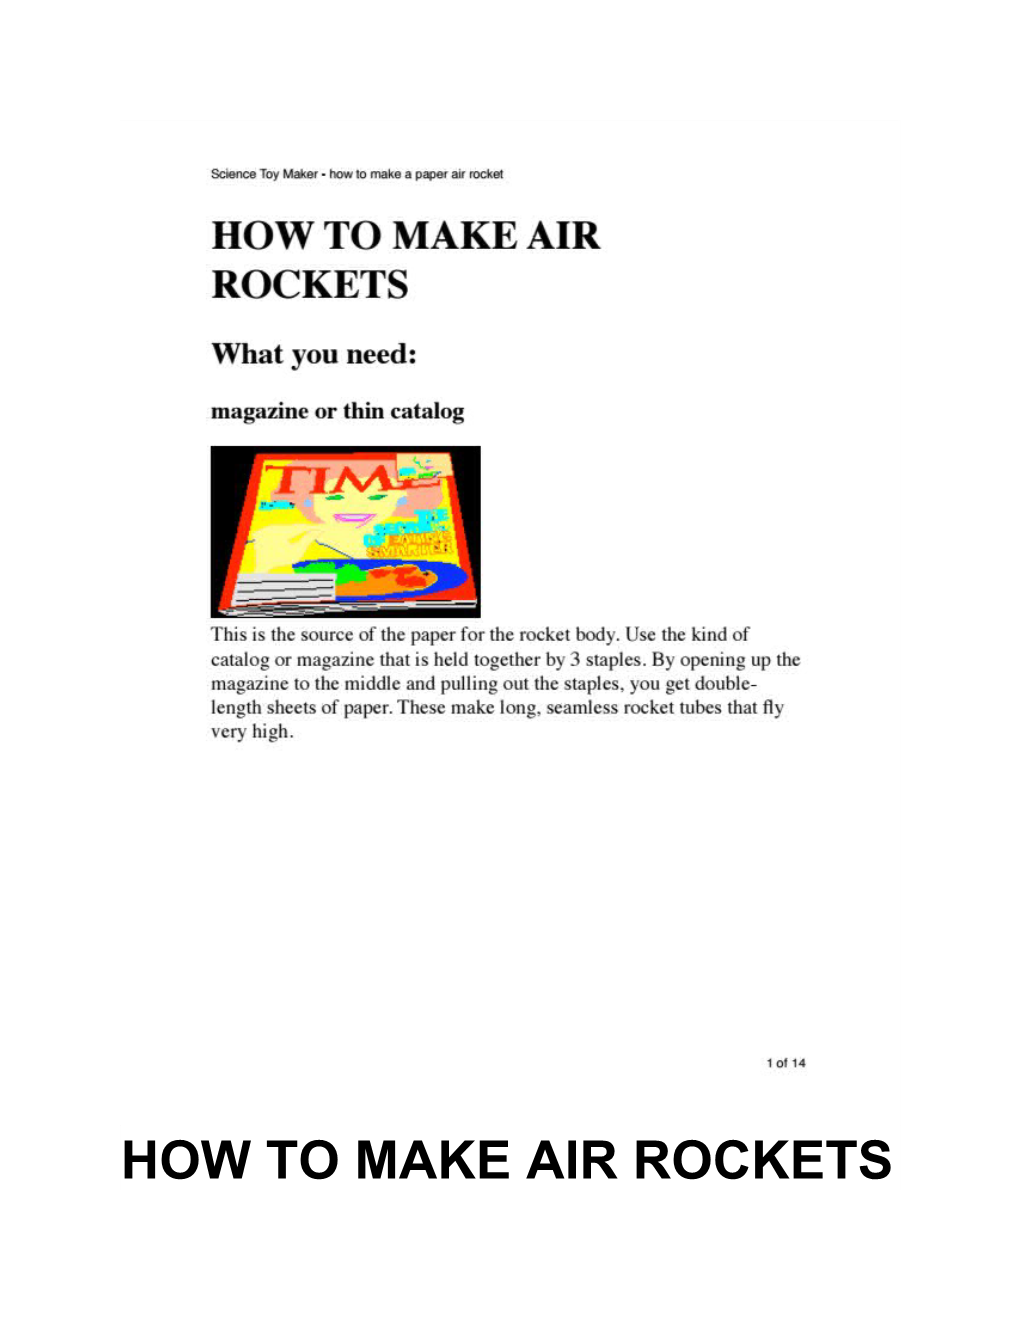 How to Make Air Rockets